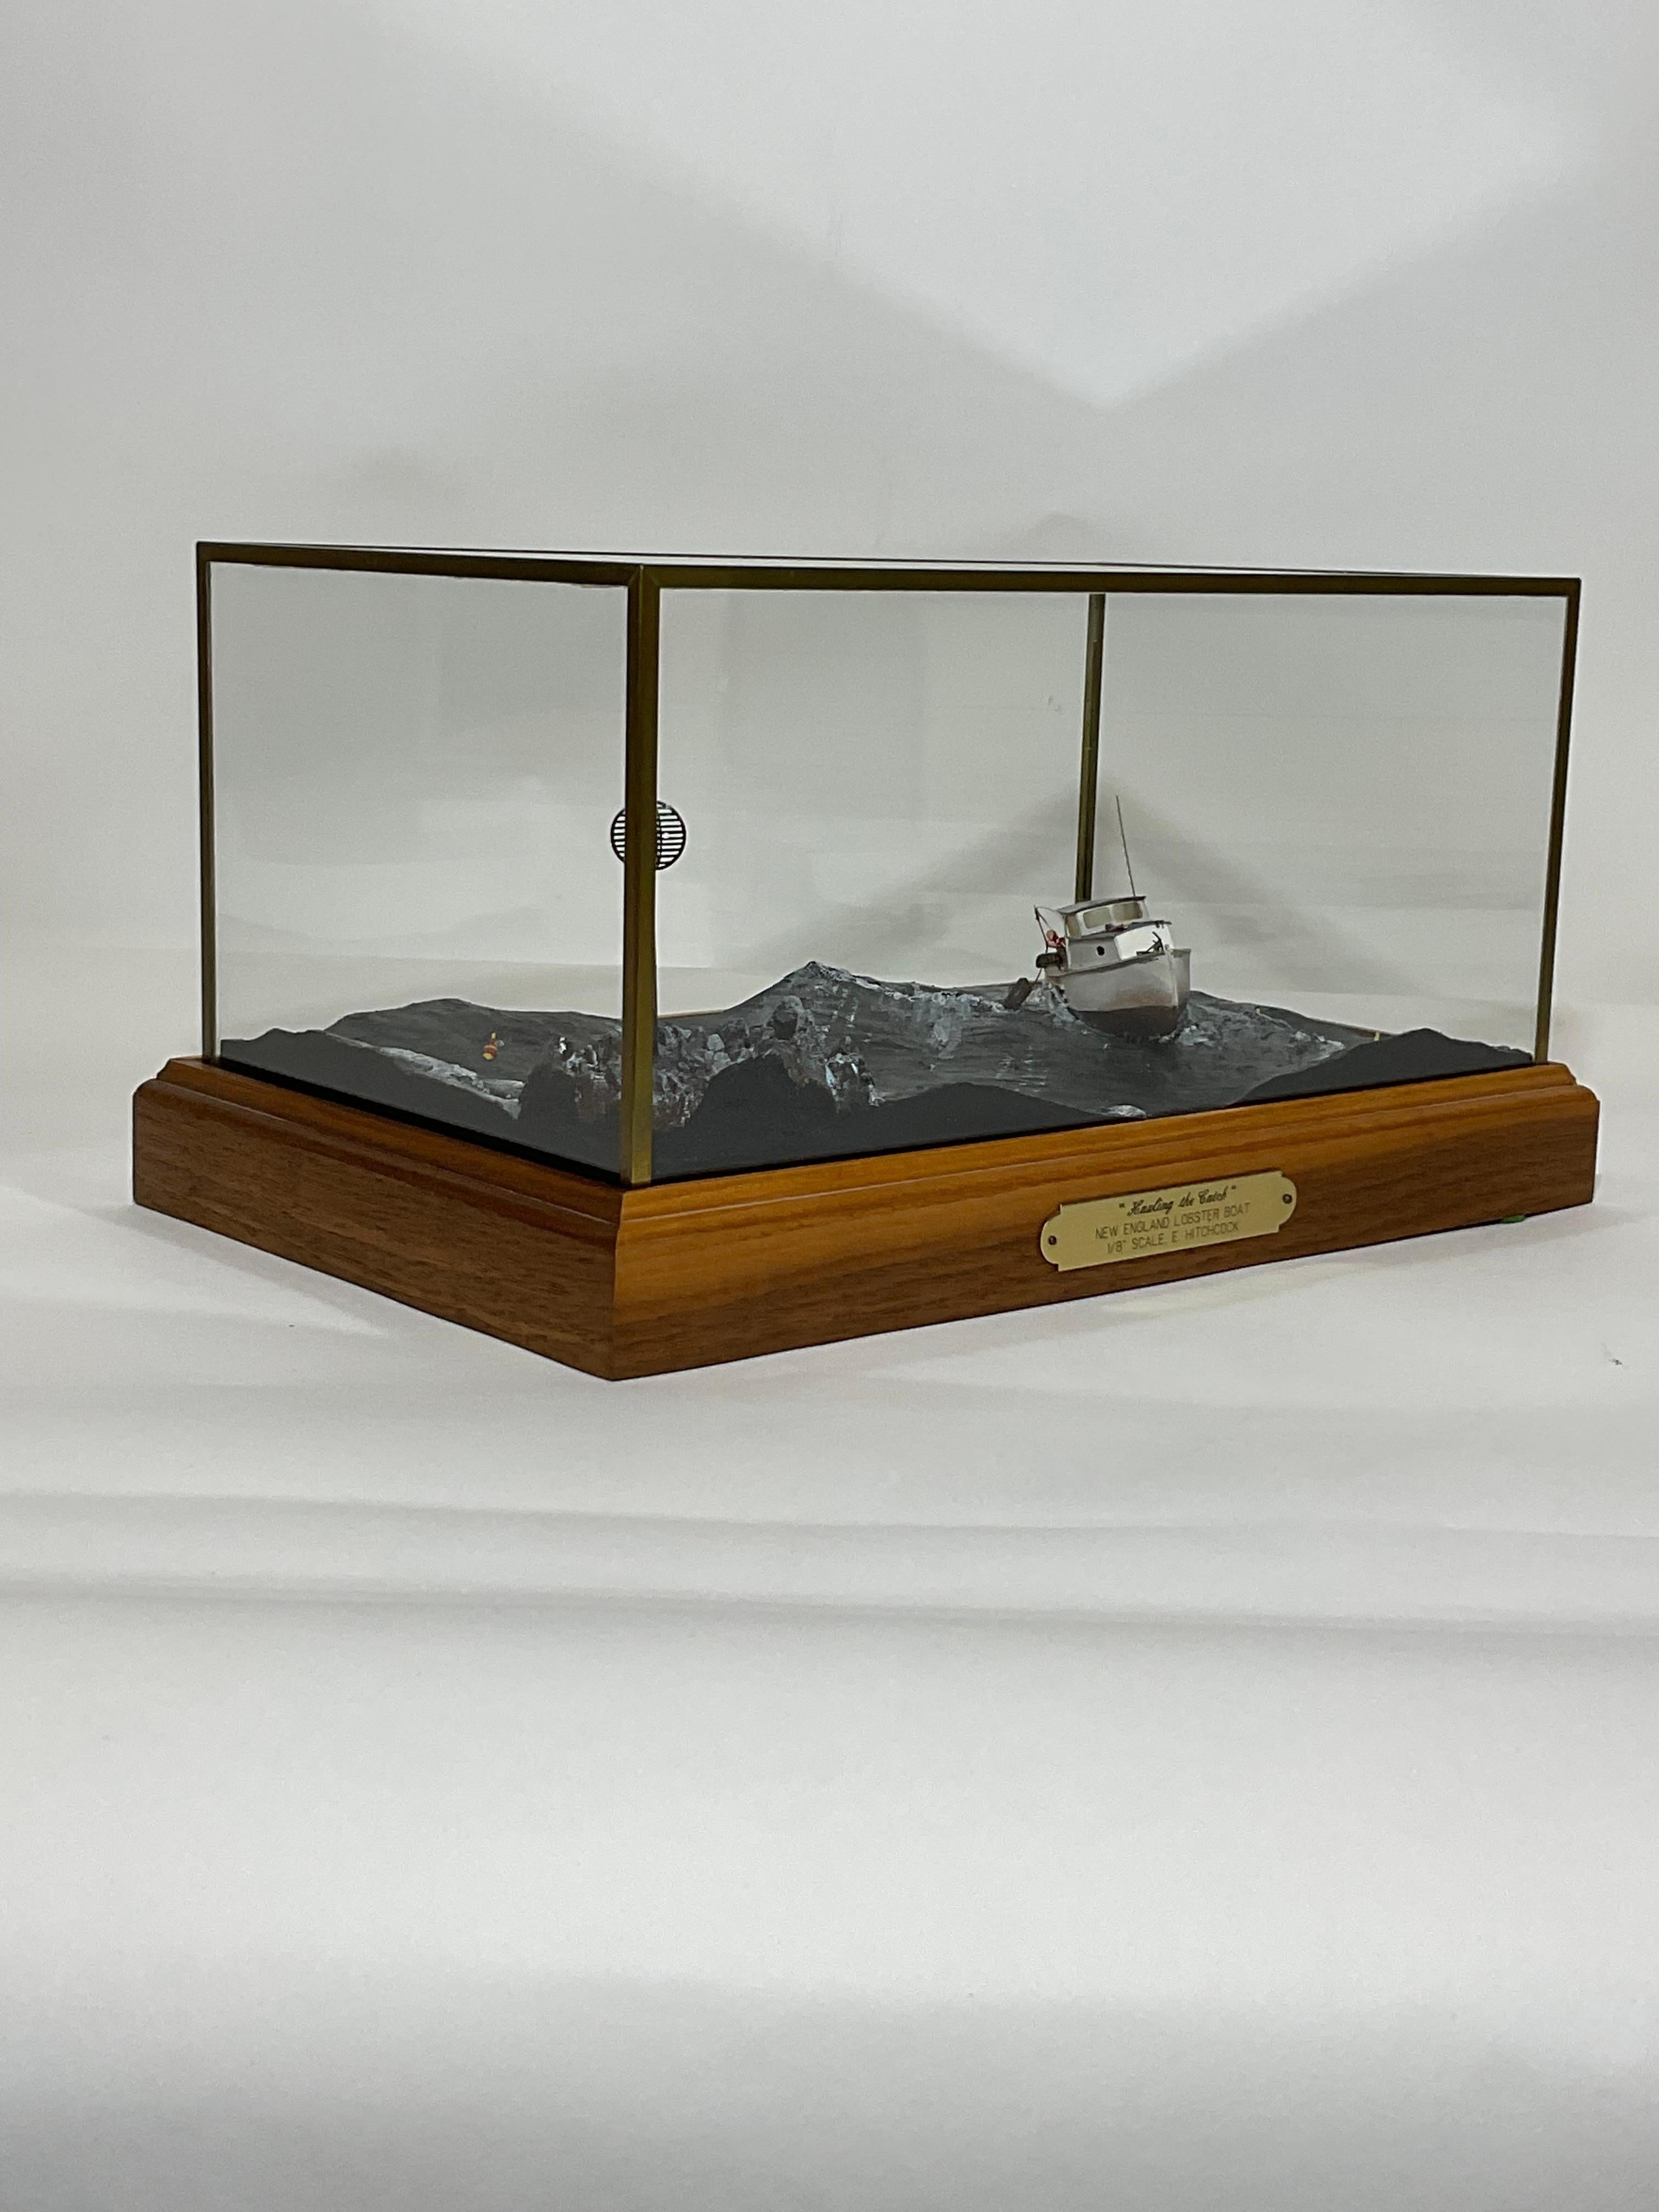 Contemporary Lobster Boat Diorama Titled 